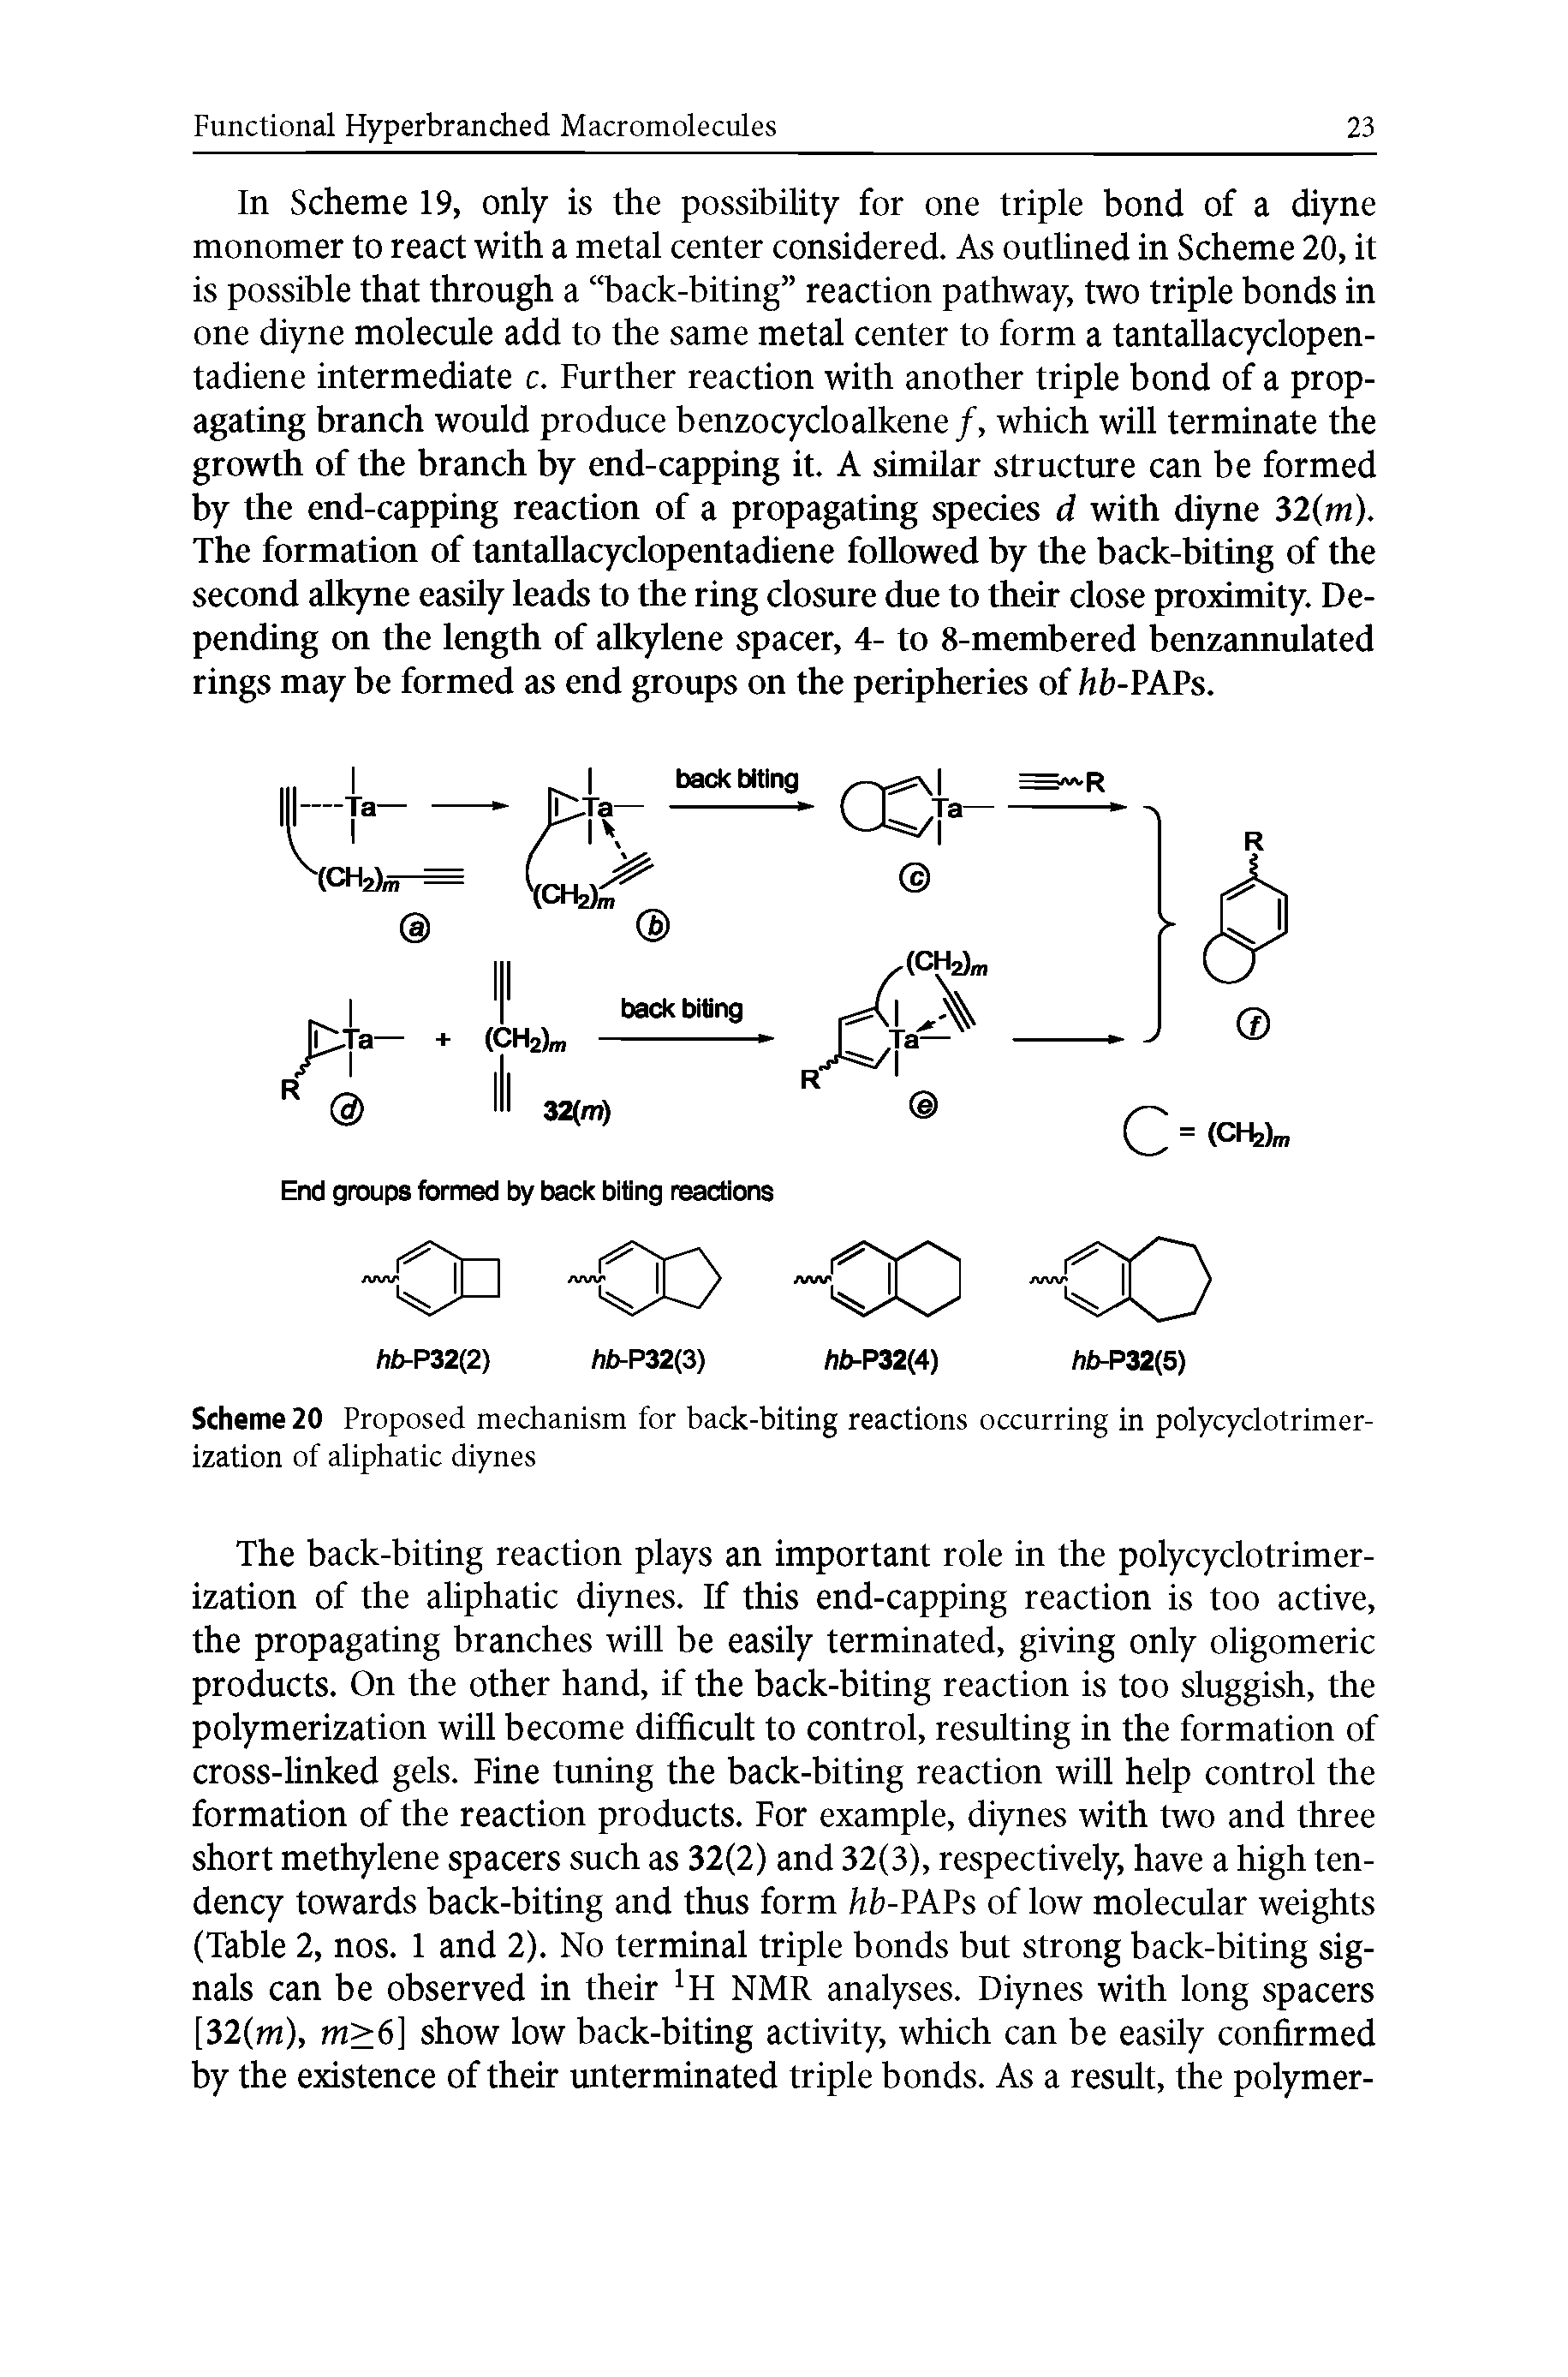 Scheme 20 Proposed mechanism for back-biting reactions occurring in polycyclotrimer-ization of aliphatic diynes...